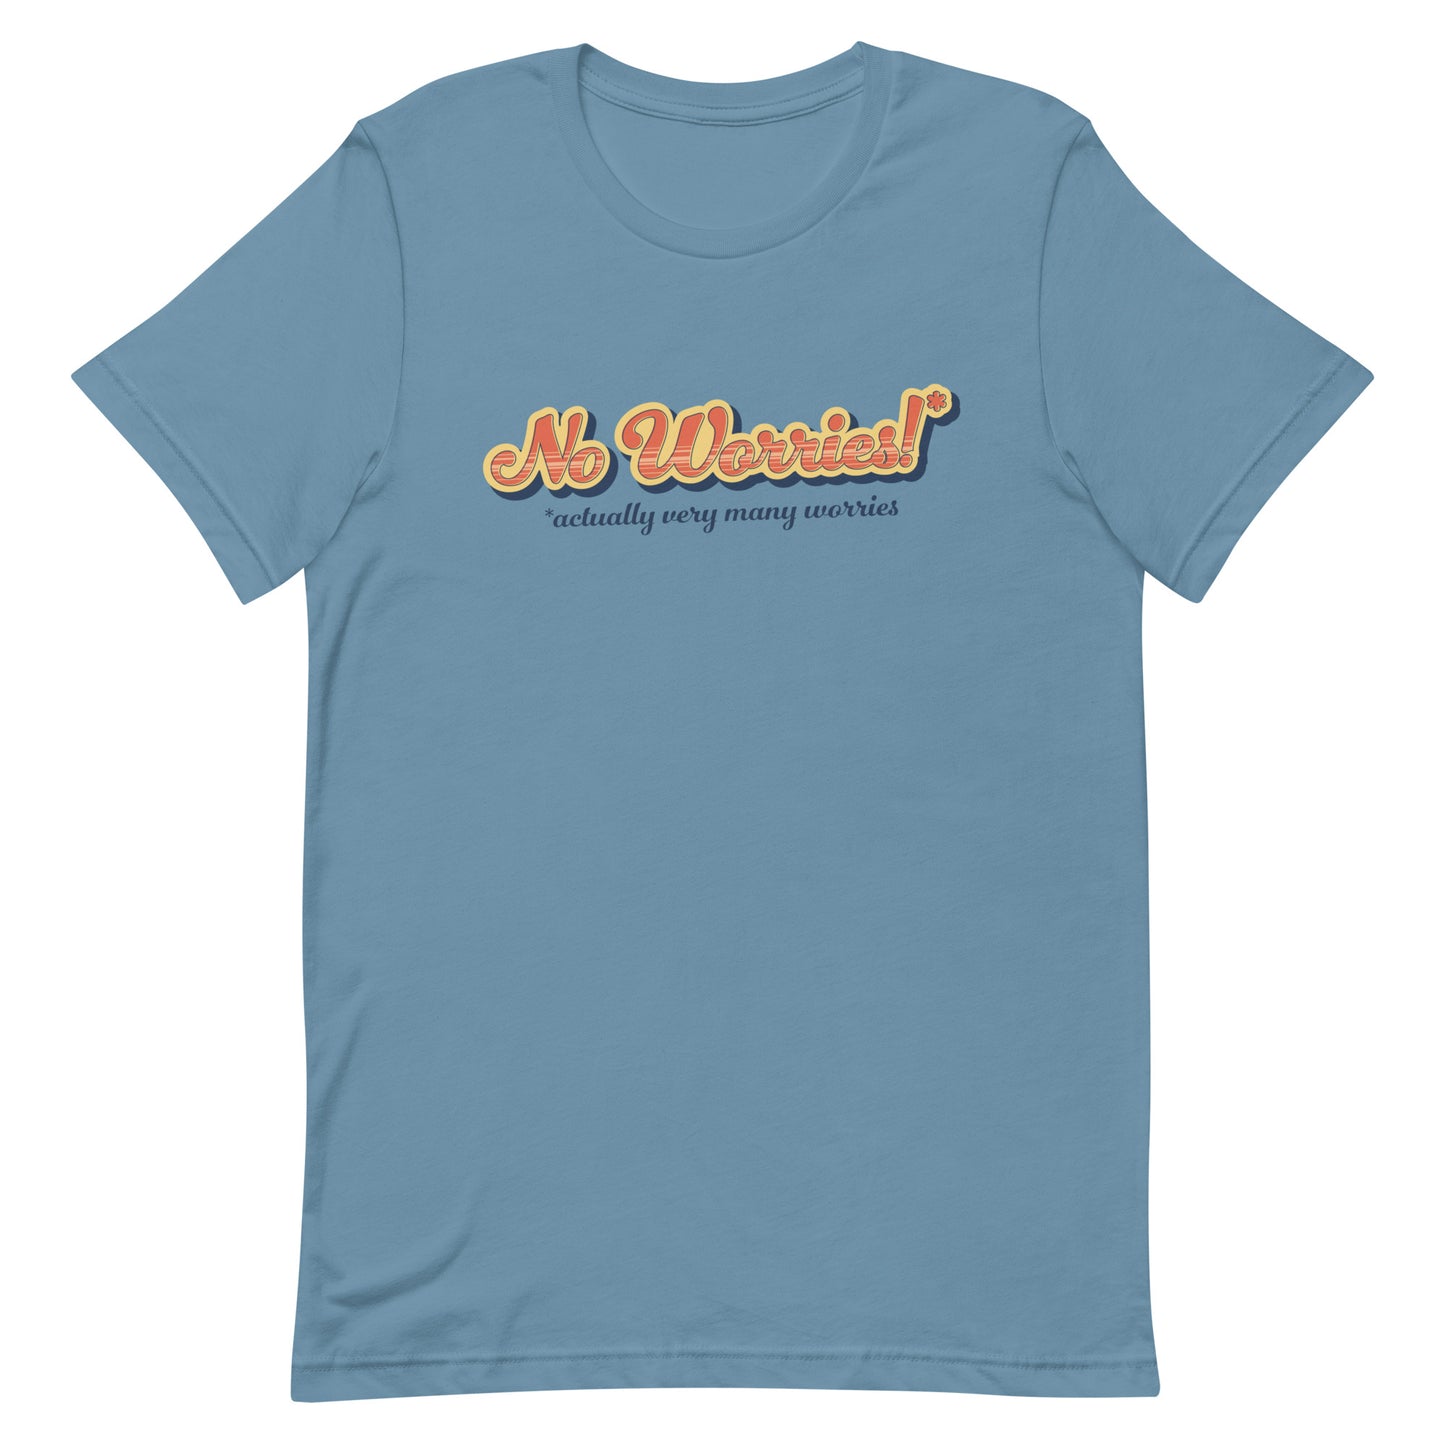 A medium blue crewneck t-shirt featuring vintage-style text that reads "No worries!* *actually very many worries"